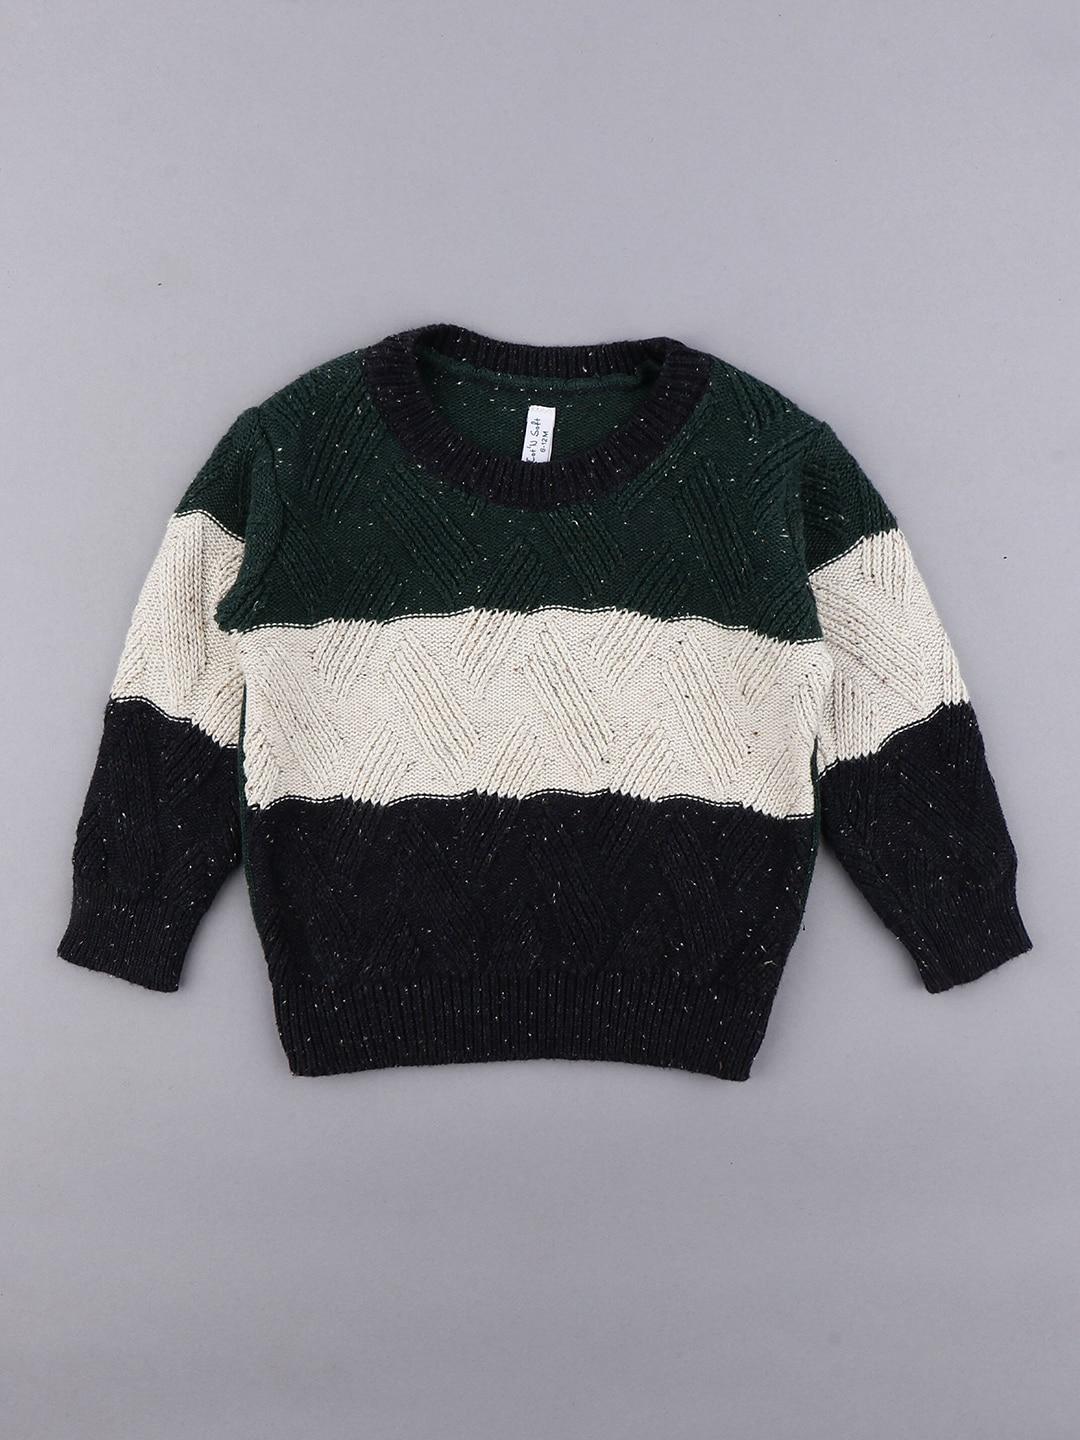 cot'n-soft-boys-colourblocked-woollen-pullover-sweater